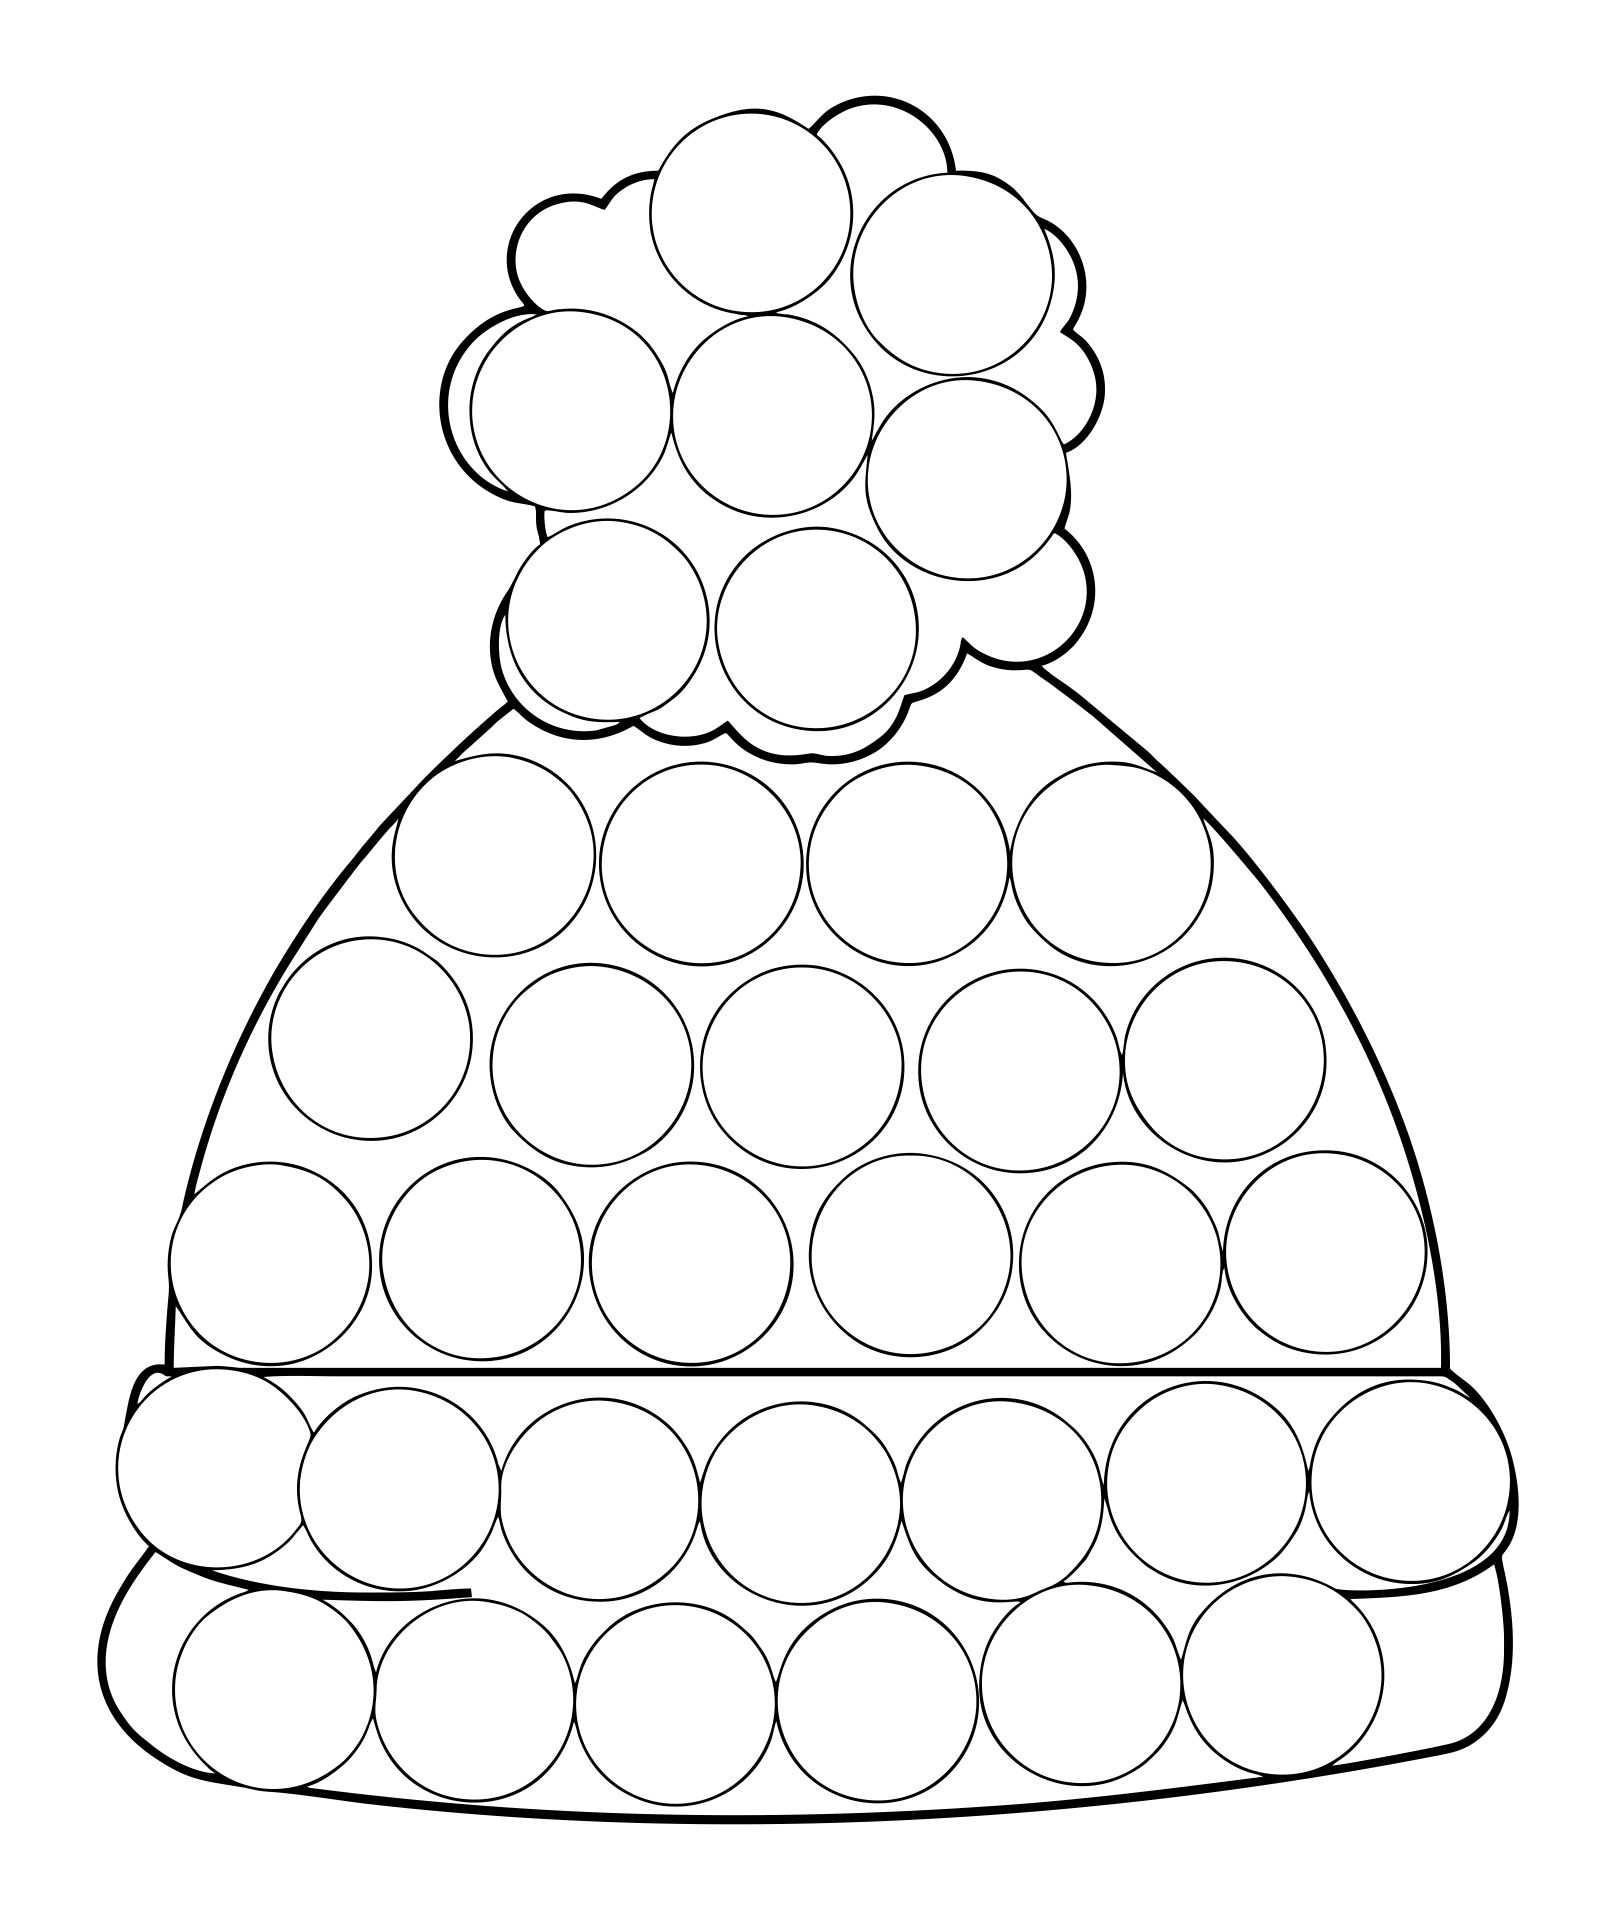 Dot Marker Coloring Pages